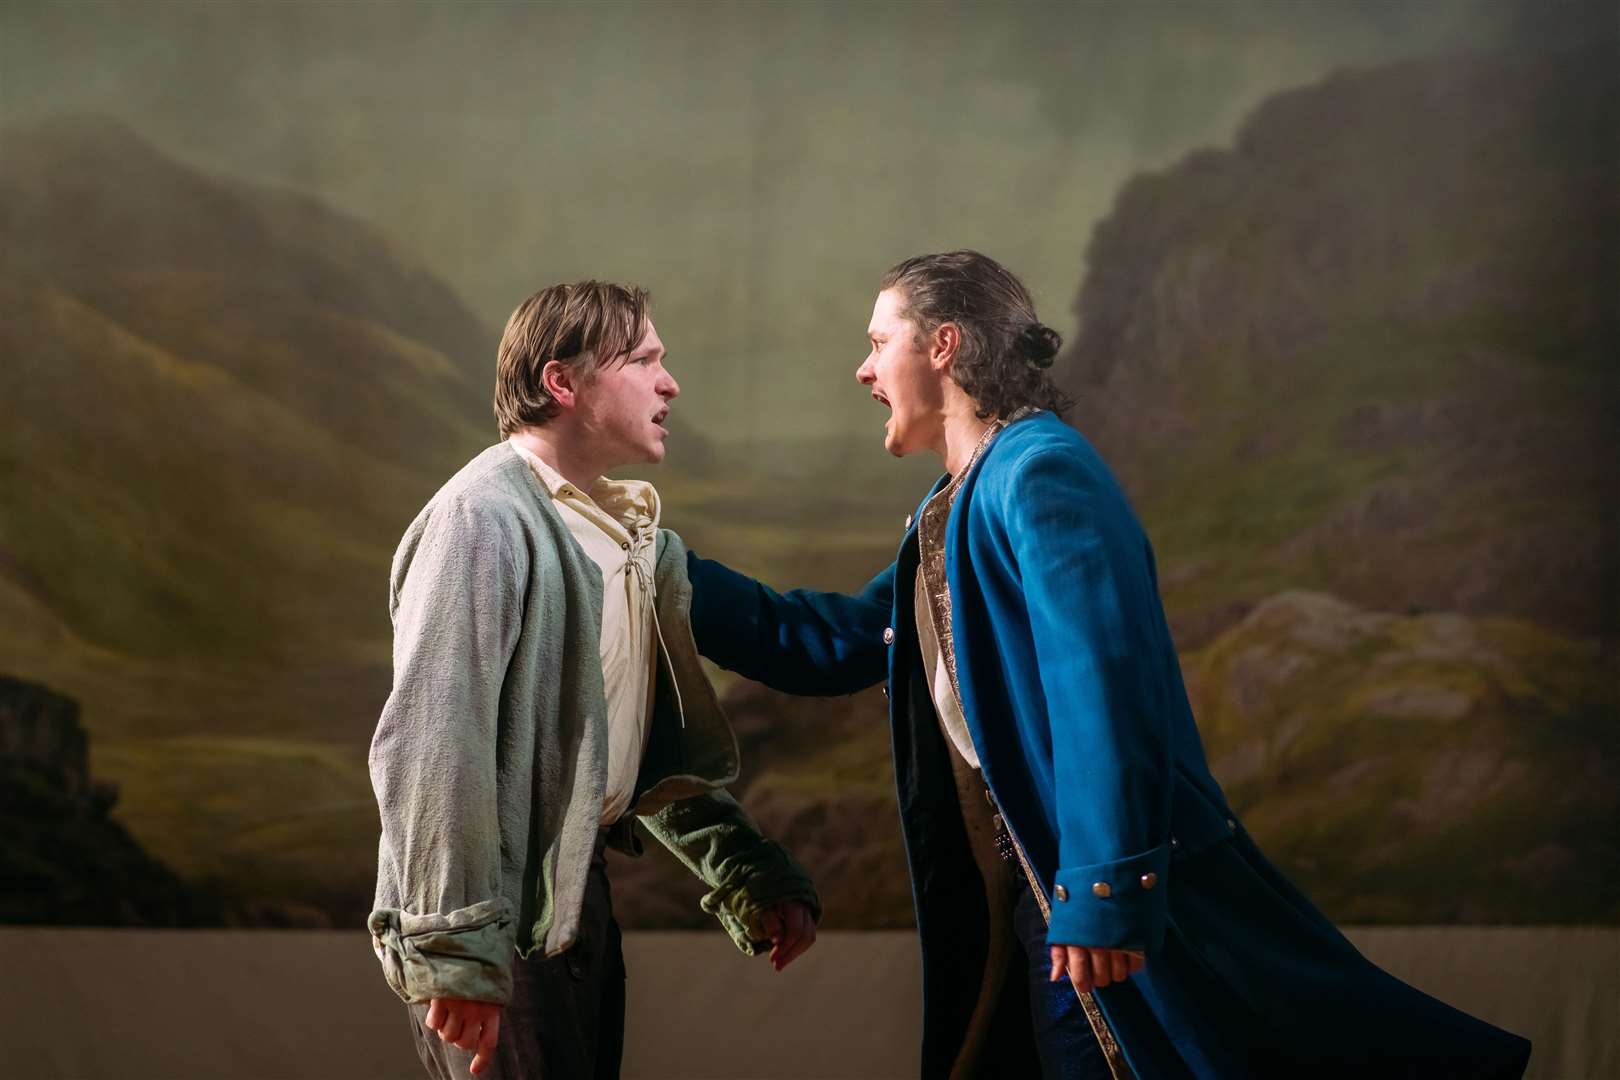 Conflict on their journey in Kidnapped – Davie (Ryan J Mckay) and Alan (Malcolm Cumming) argue. Picture: MIhaela Bodlovic